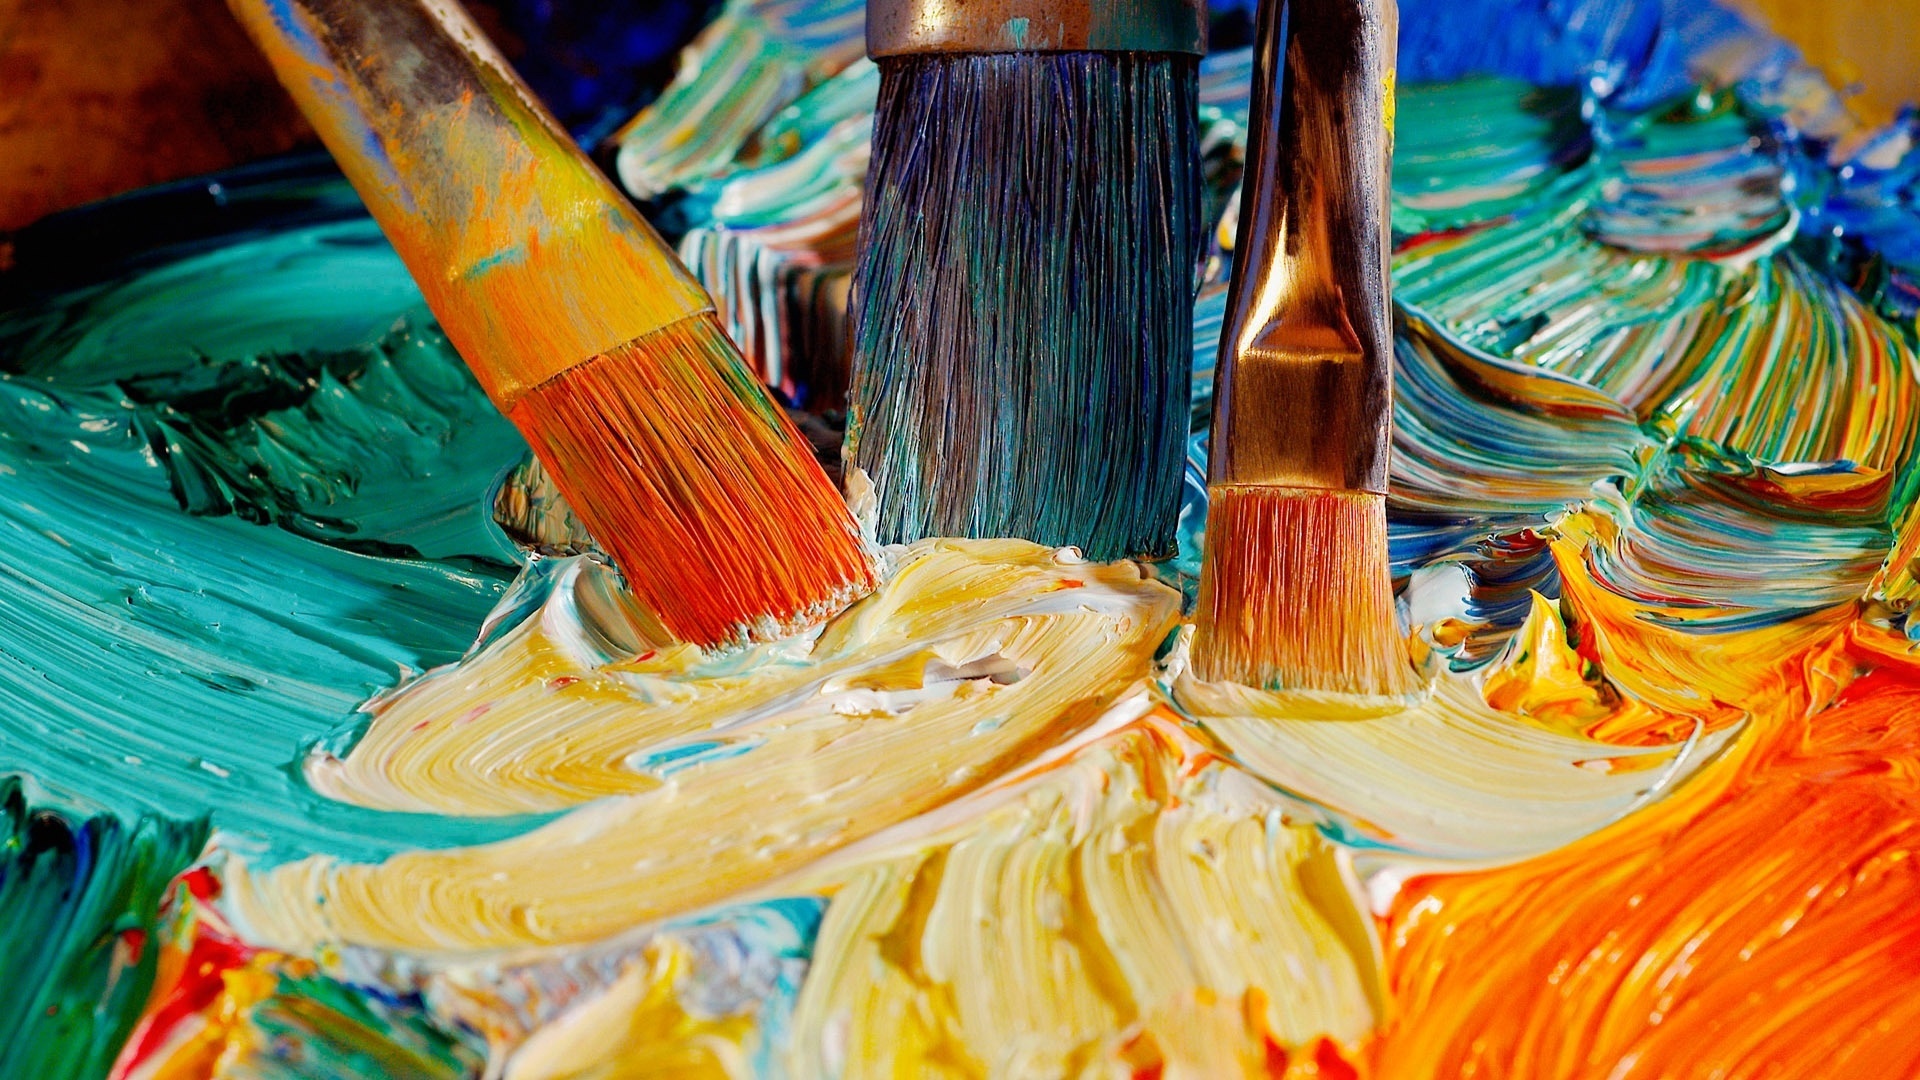 Brushes and paint wallpapers, Artistic tools, Creative expression, Textured background, 1920x1080 Full HD Desktop